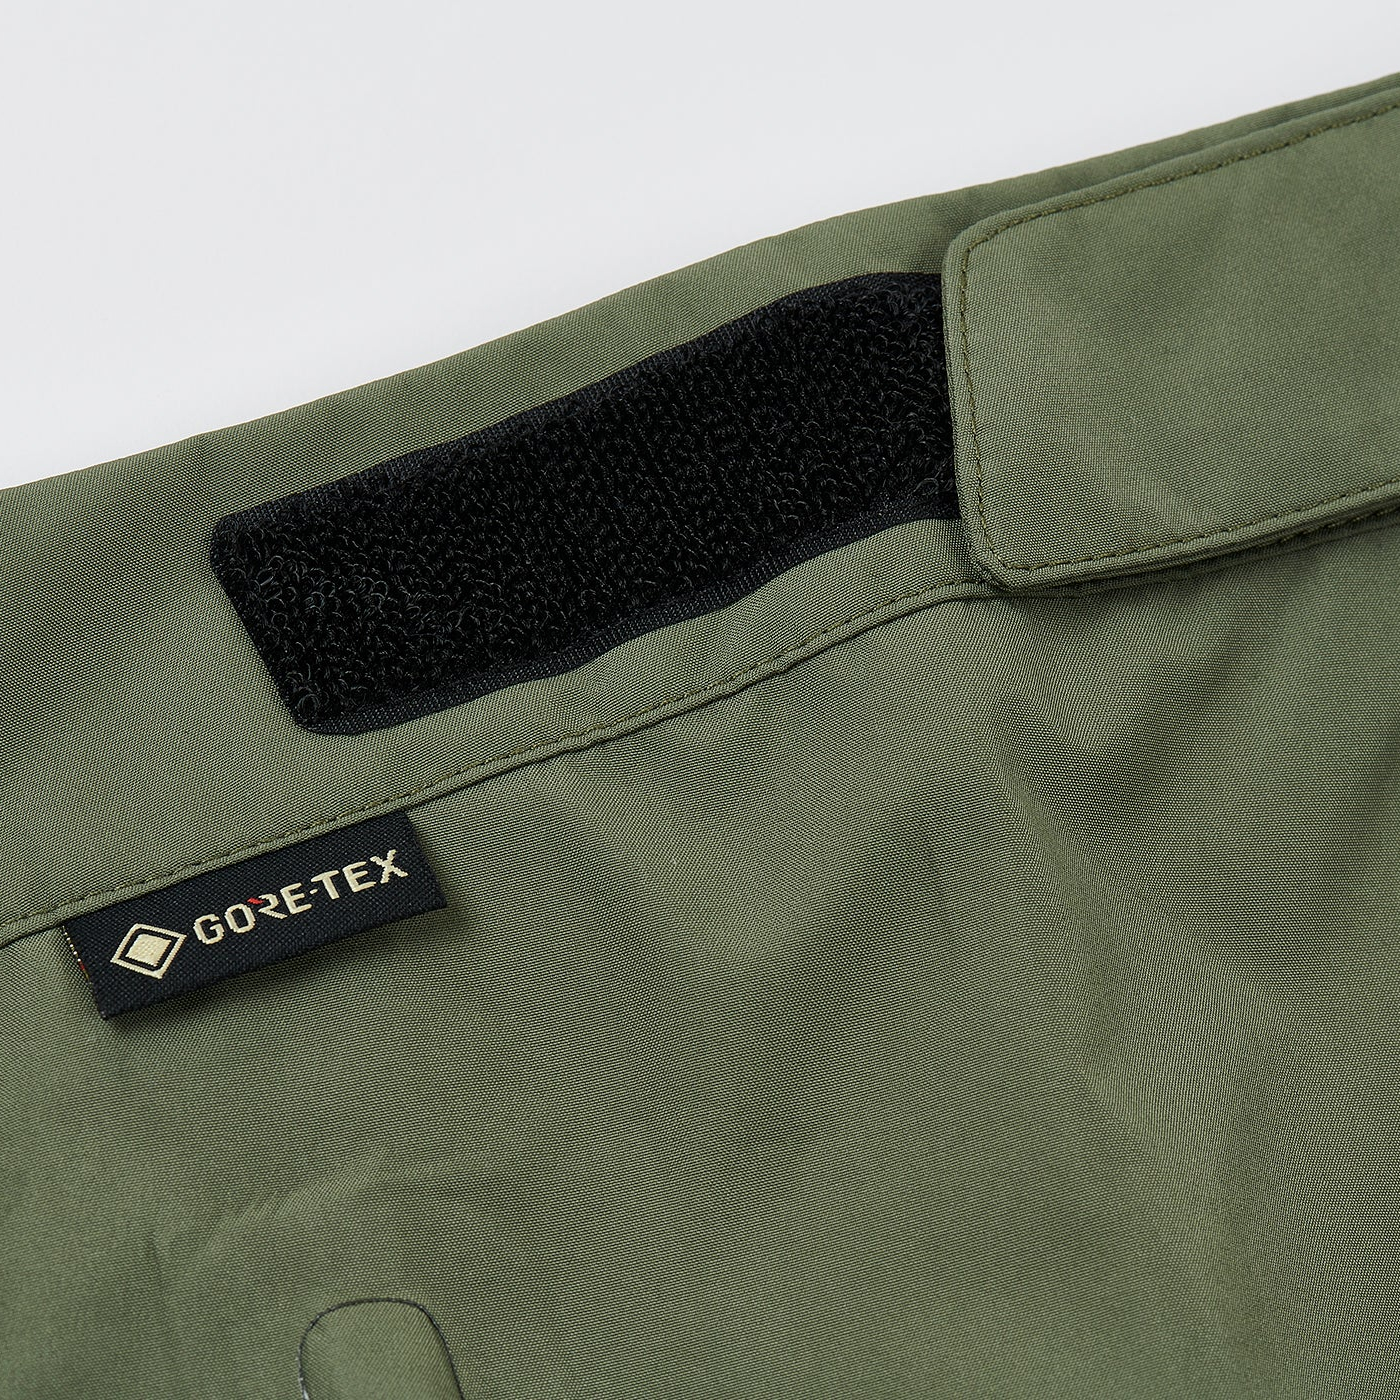 Thumbnail GORE-TEX CARGO BOTTOM OLIVE one color